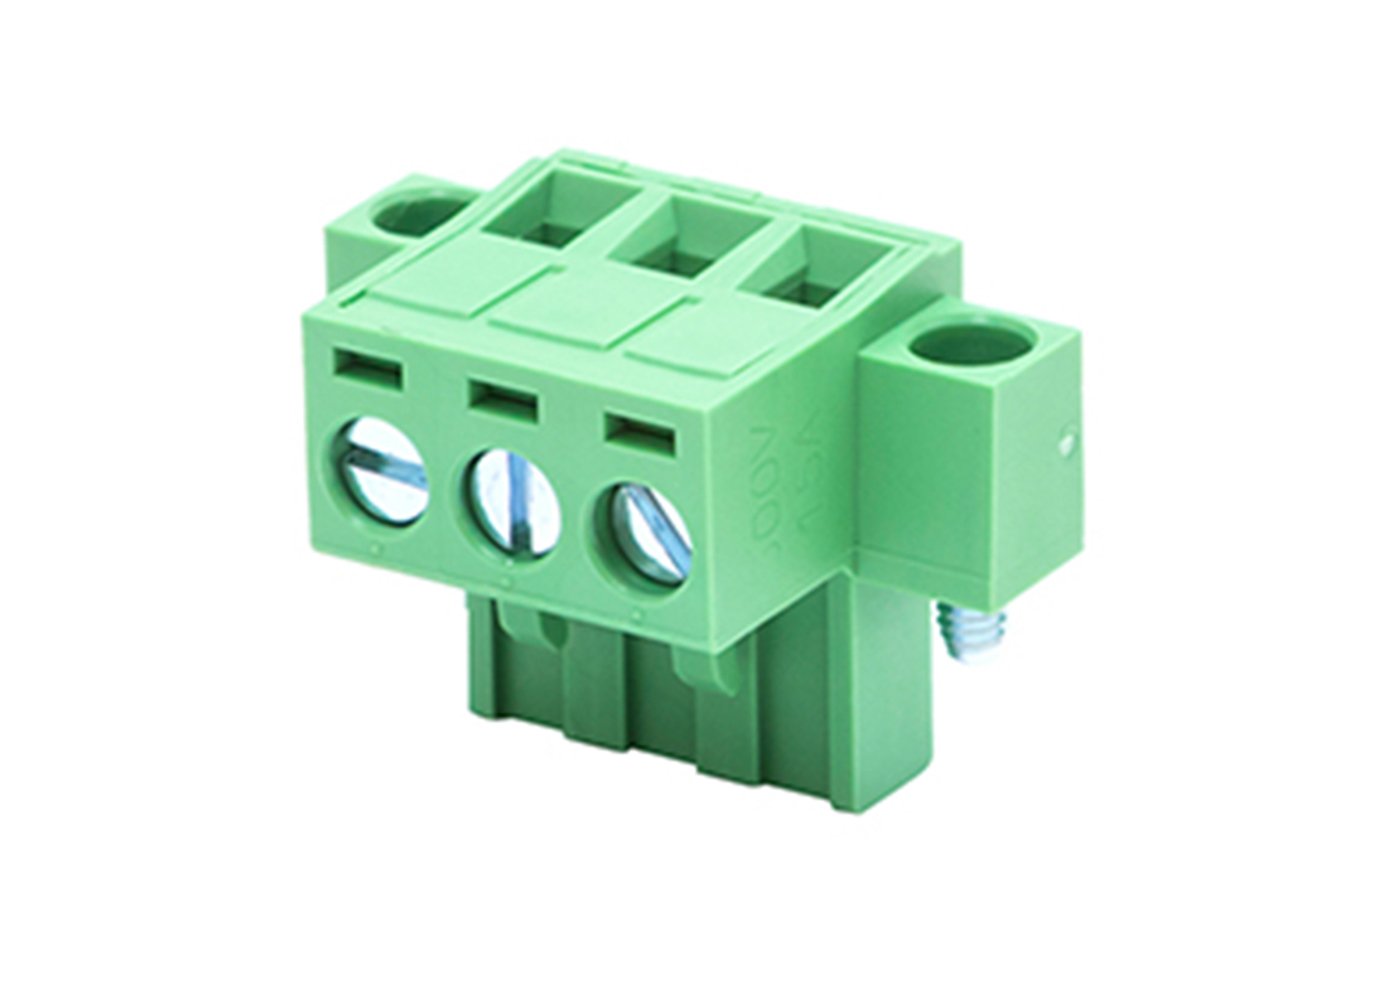 Input Power Connector<br/>

<span class="clsSpnProdMdls">For OMI/Box PC Only</span>